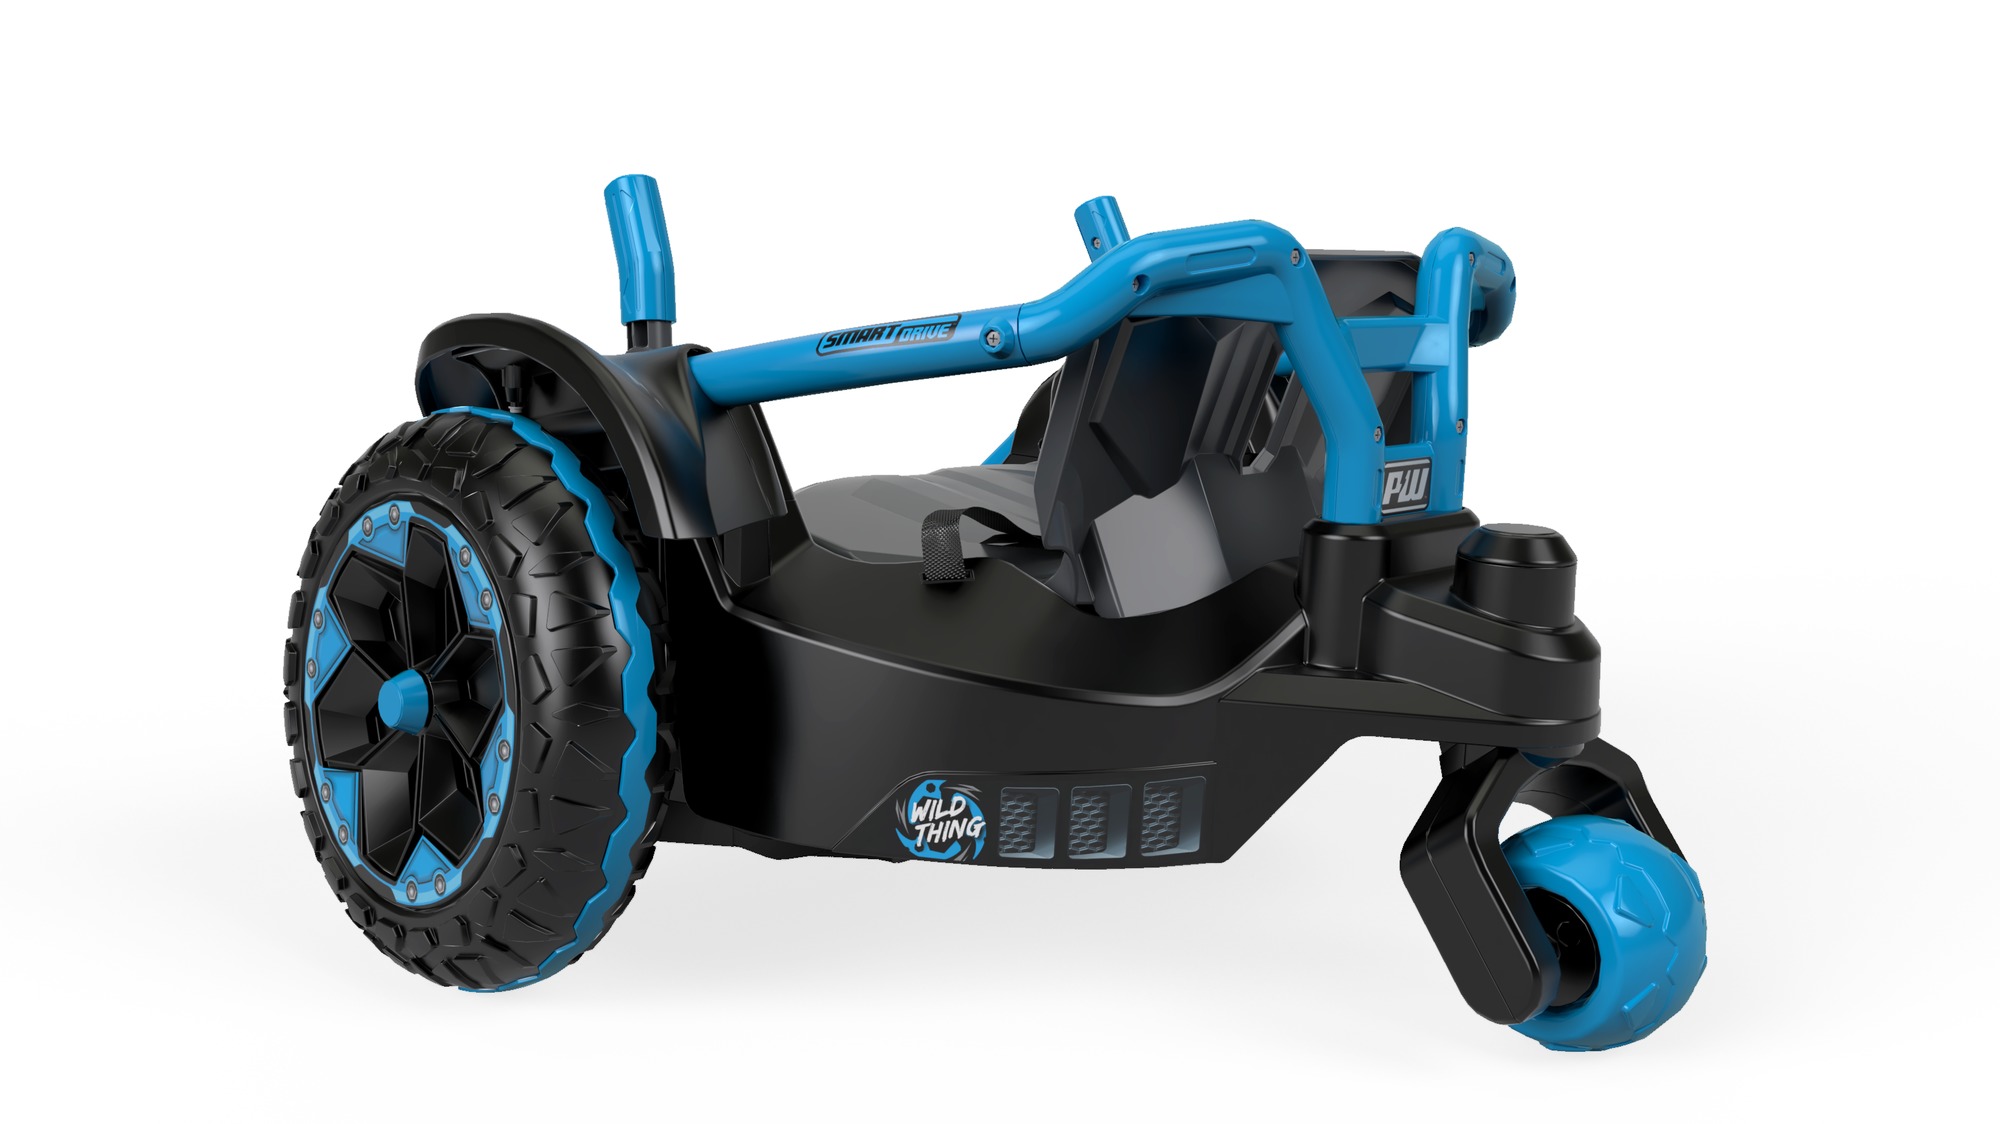 Power Wheels Wild Thing 360 Spinning Ride-On Vehicle, Blue, 12V - image 7 of 10